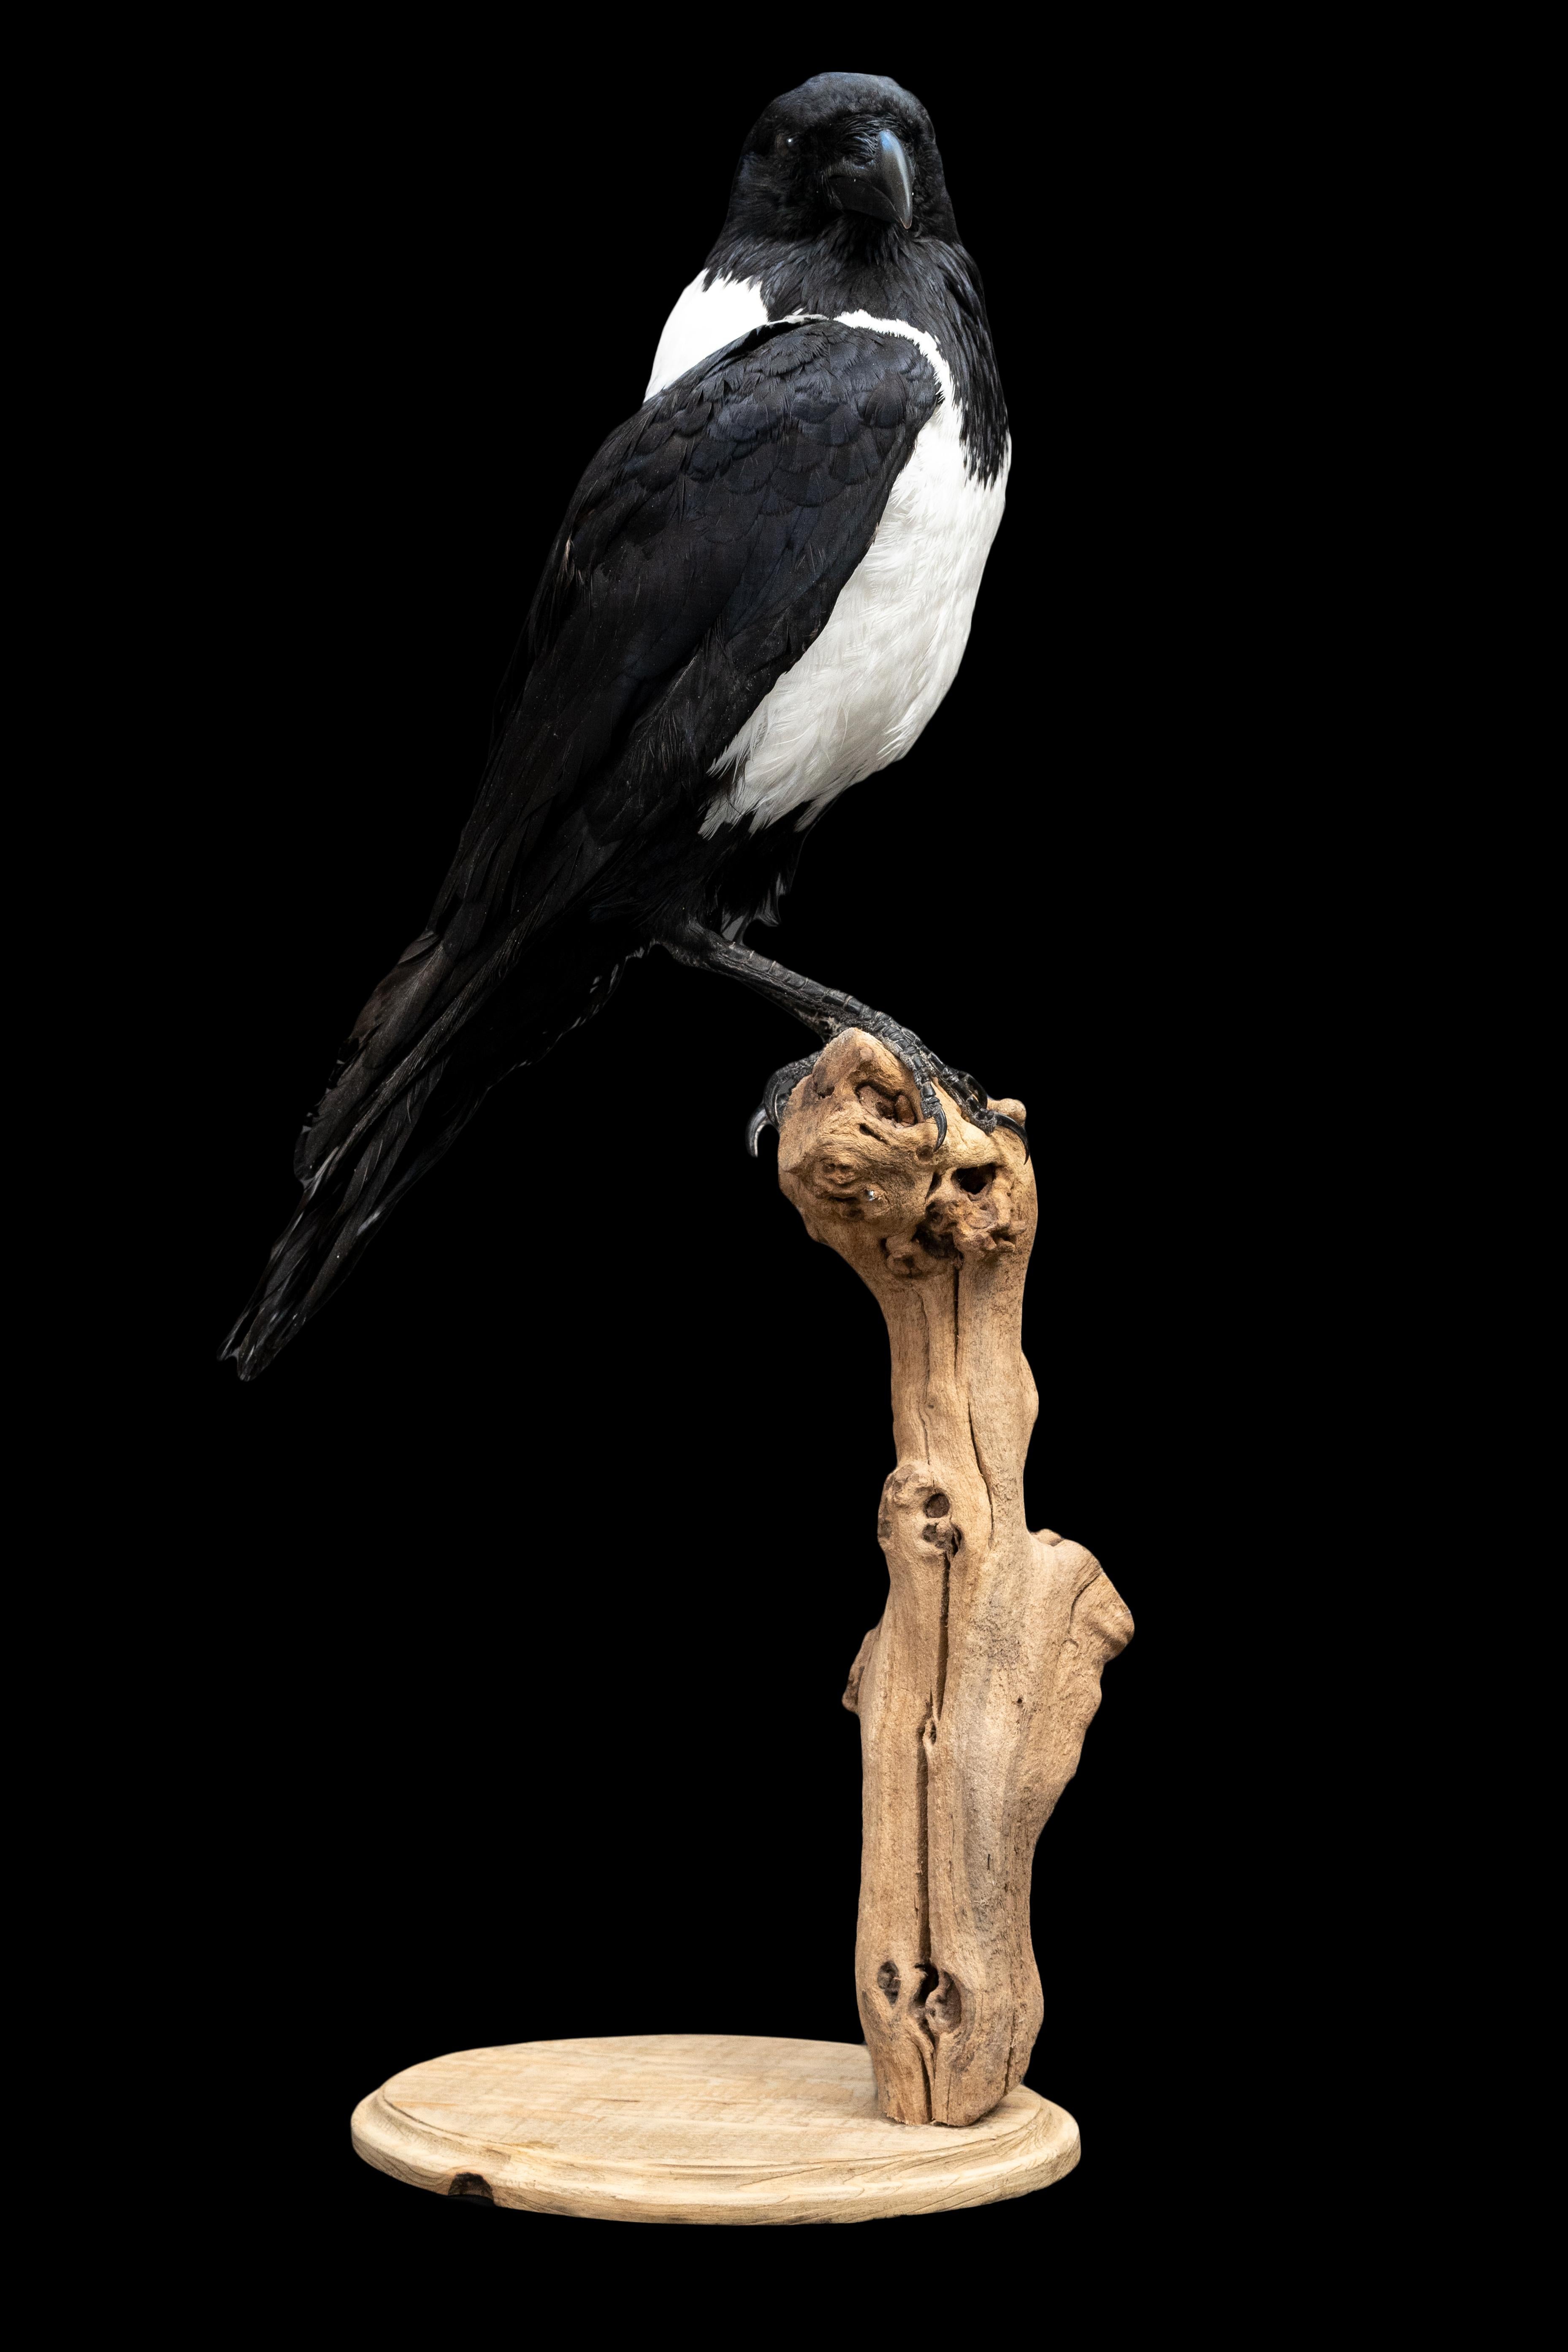 Mounted pied crow taxidermy:

The pied crow is a widely distributed African bird species in the crow genus. Structurally, the pied crow is better thought of as a small crow-sized raven, especially as it can hybridize with the Somali crow where